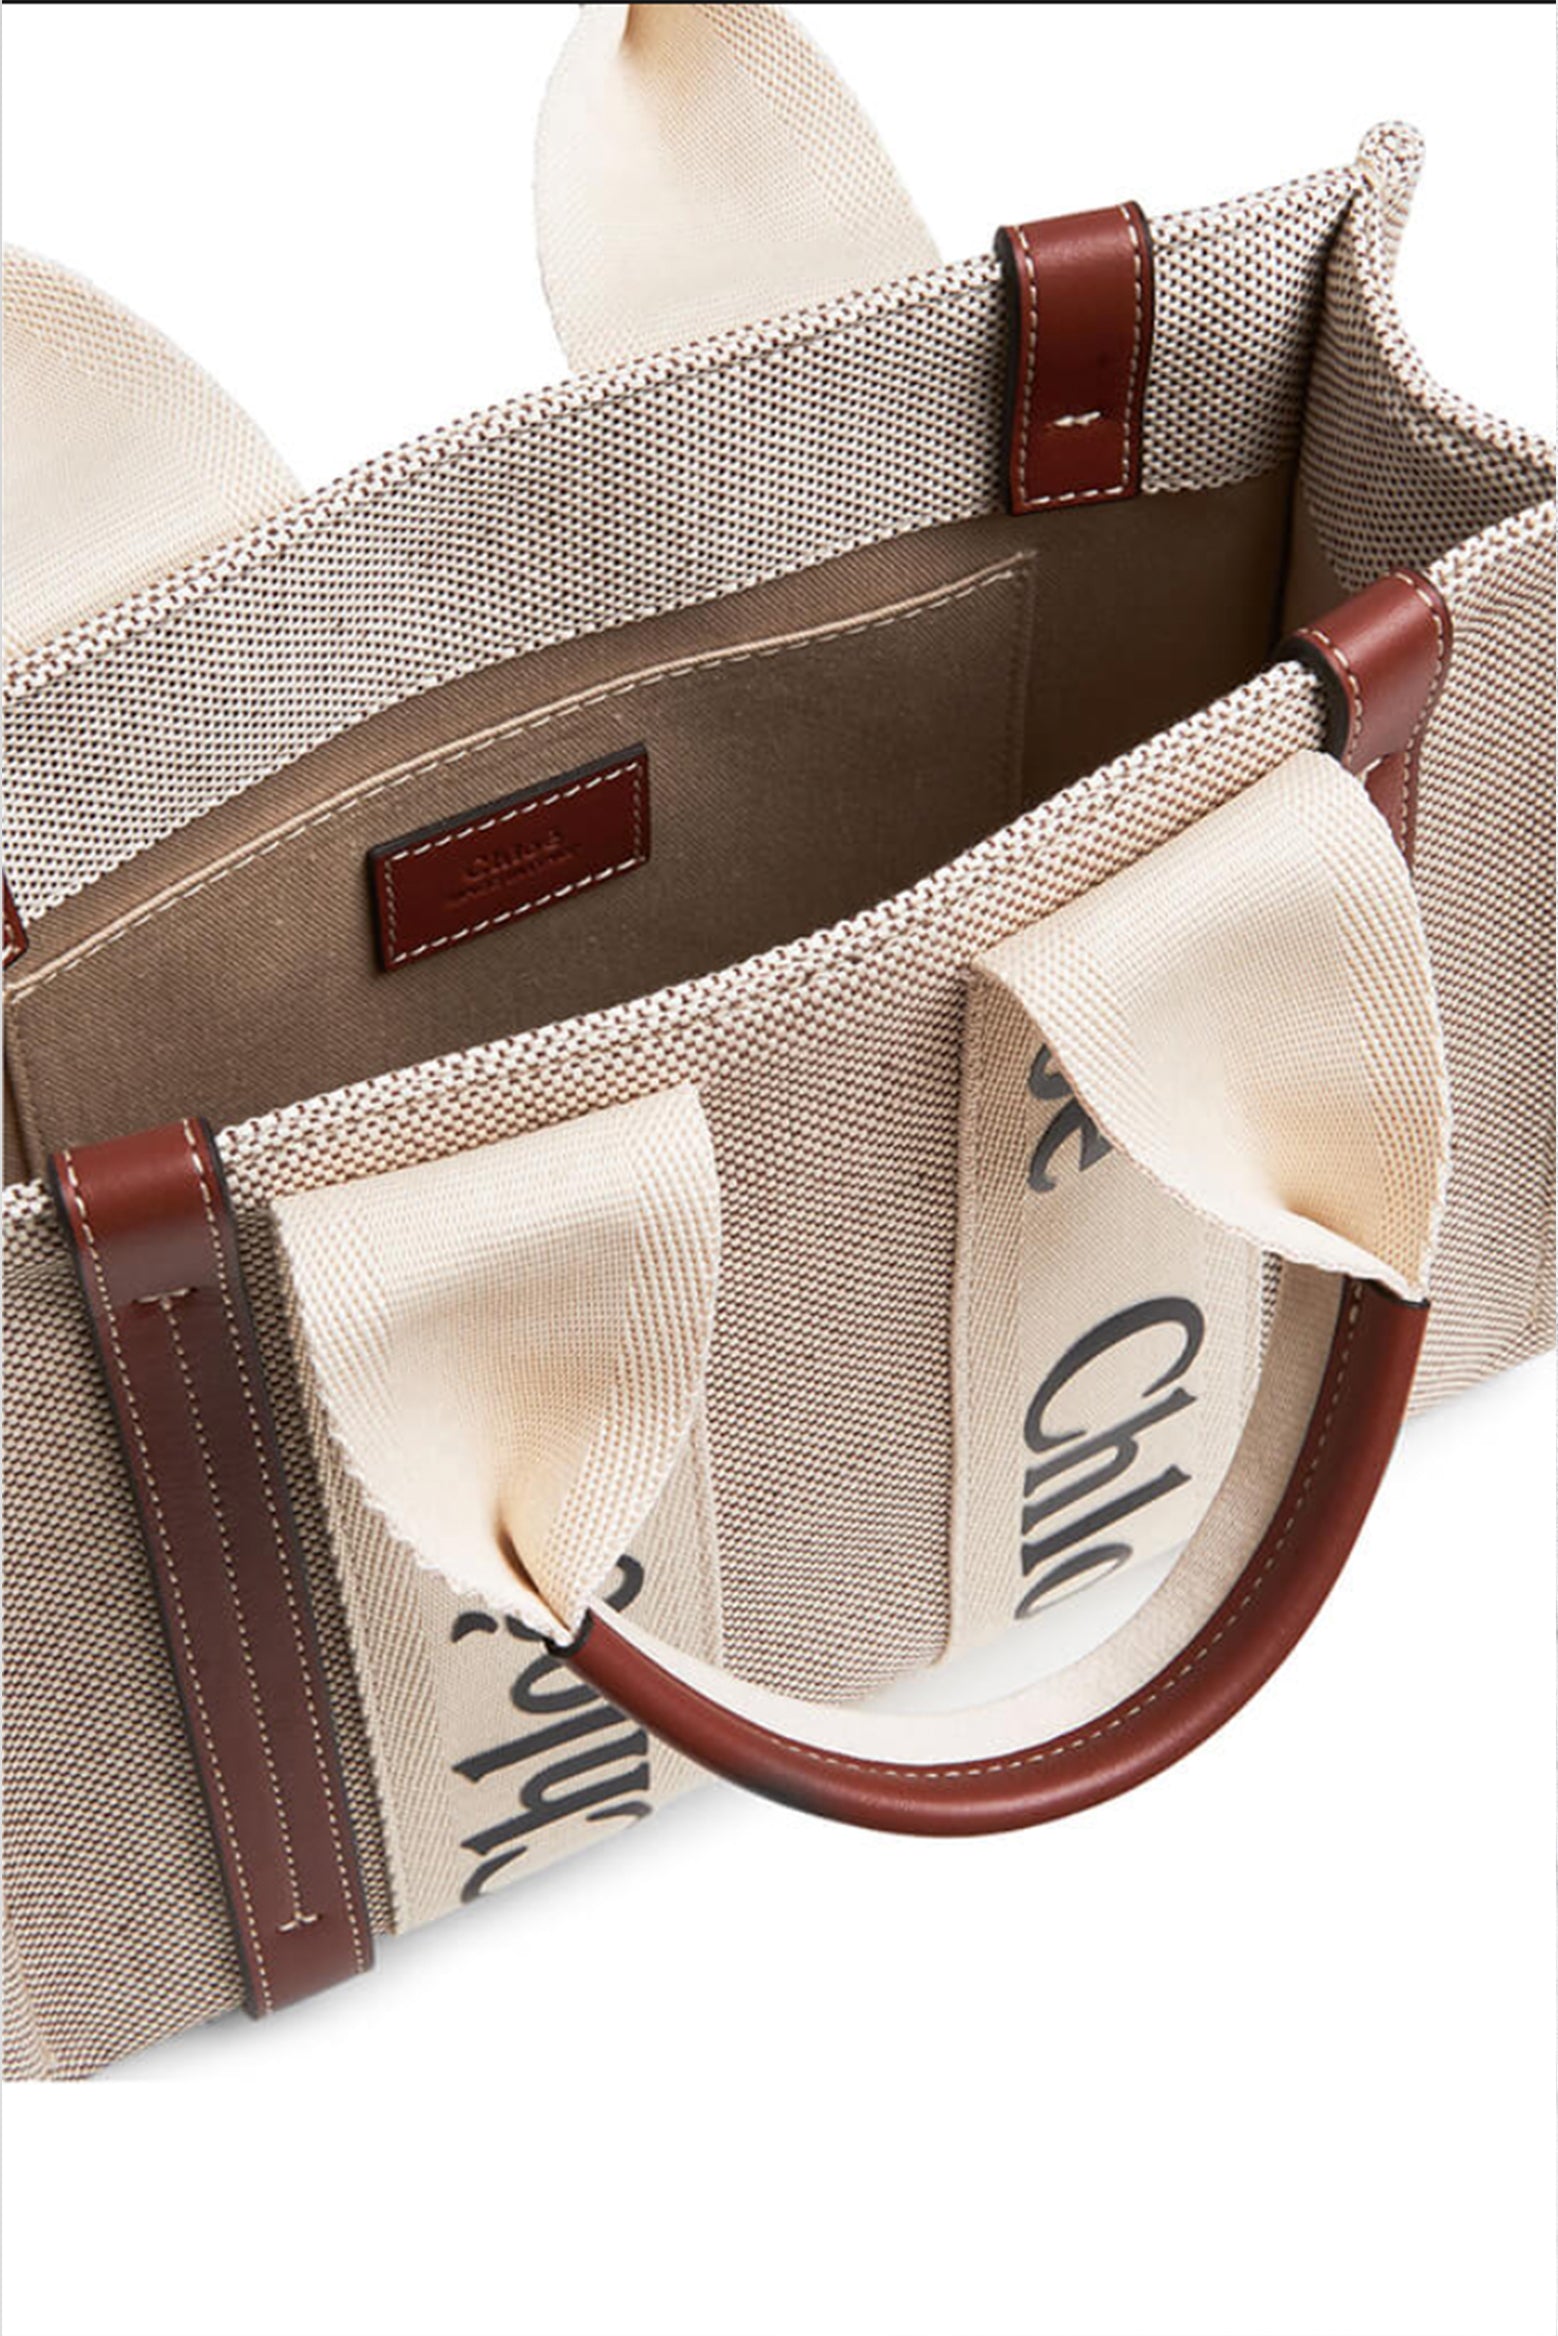 Chloé Woody Medium Tote in White and Brown available at The New Trend Australia.